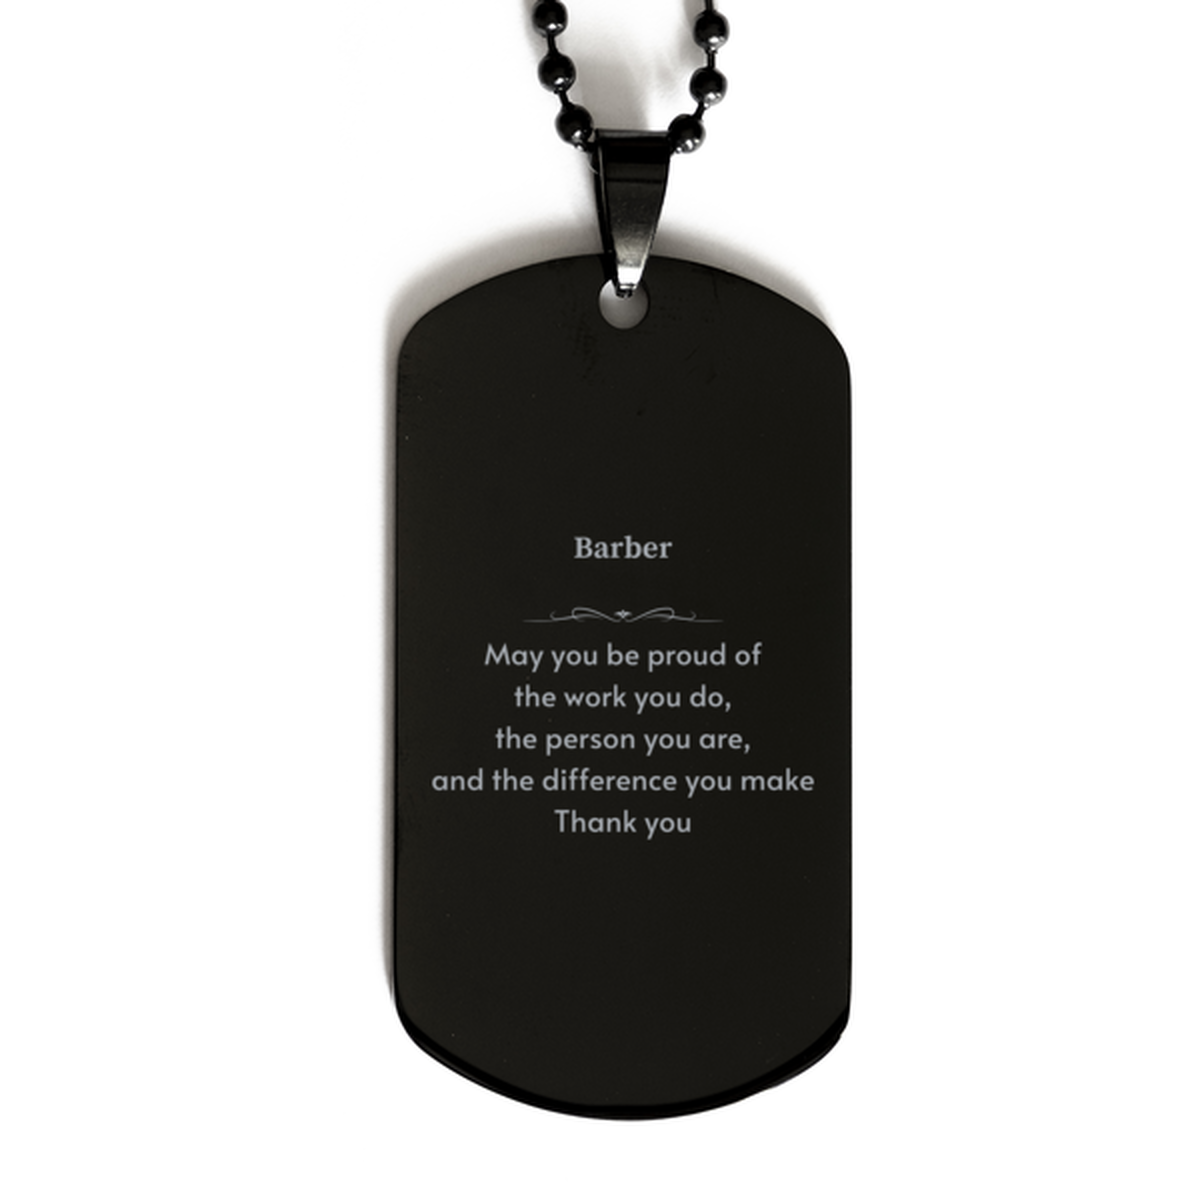 Heartwarming Black Dog Tag Retirement Coworkers Gifts for Barber, Barber May You be proud of the work you do, the person you are Gifts for Boss Men Women Friends